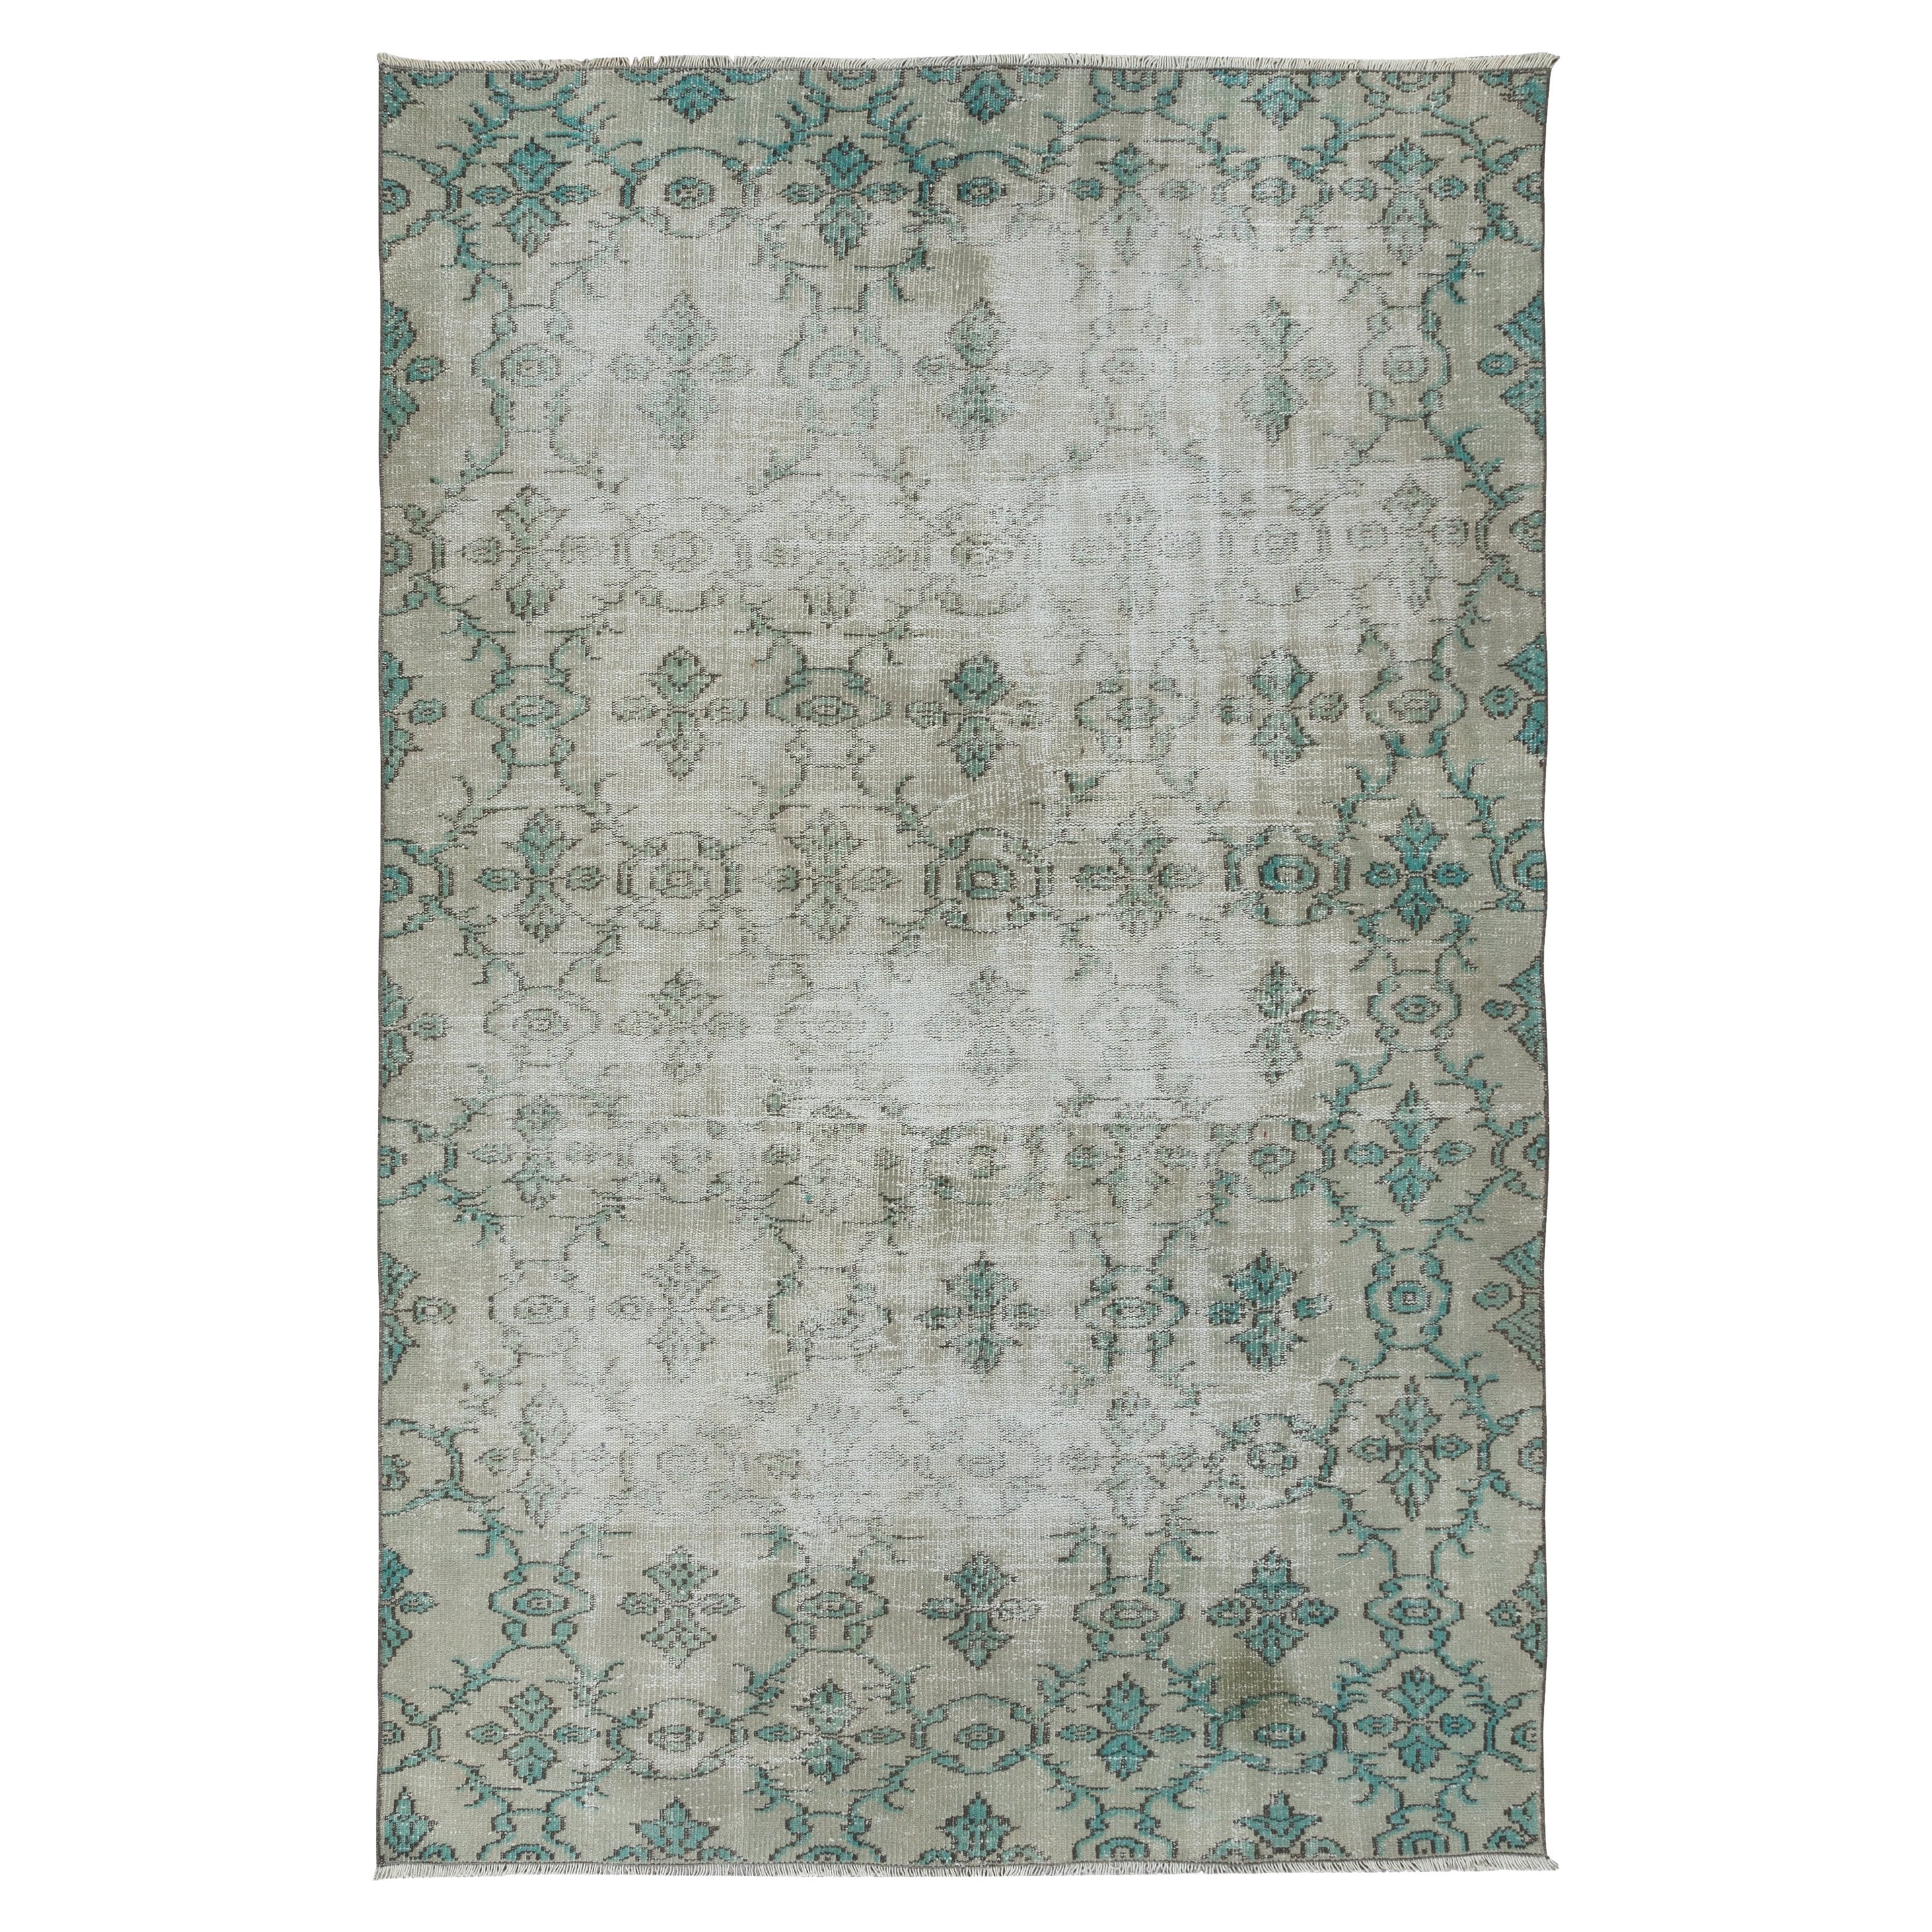 6.3x9.4 Ft Faded Vintage Handmade Anatolian Oushak Area Rug in Beige & Green For Sale